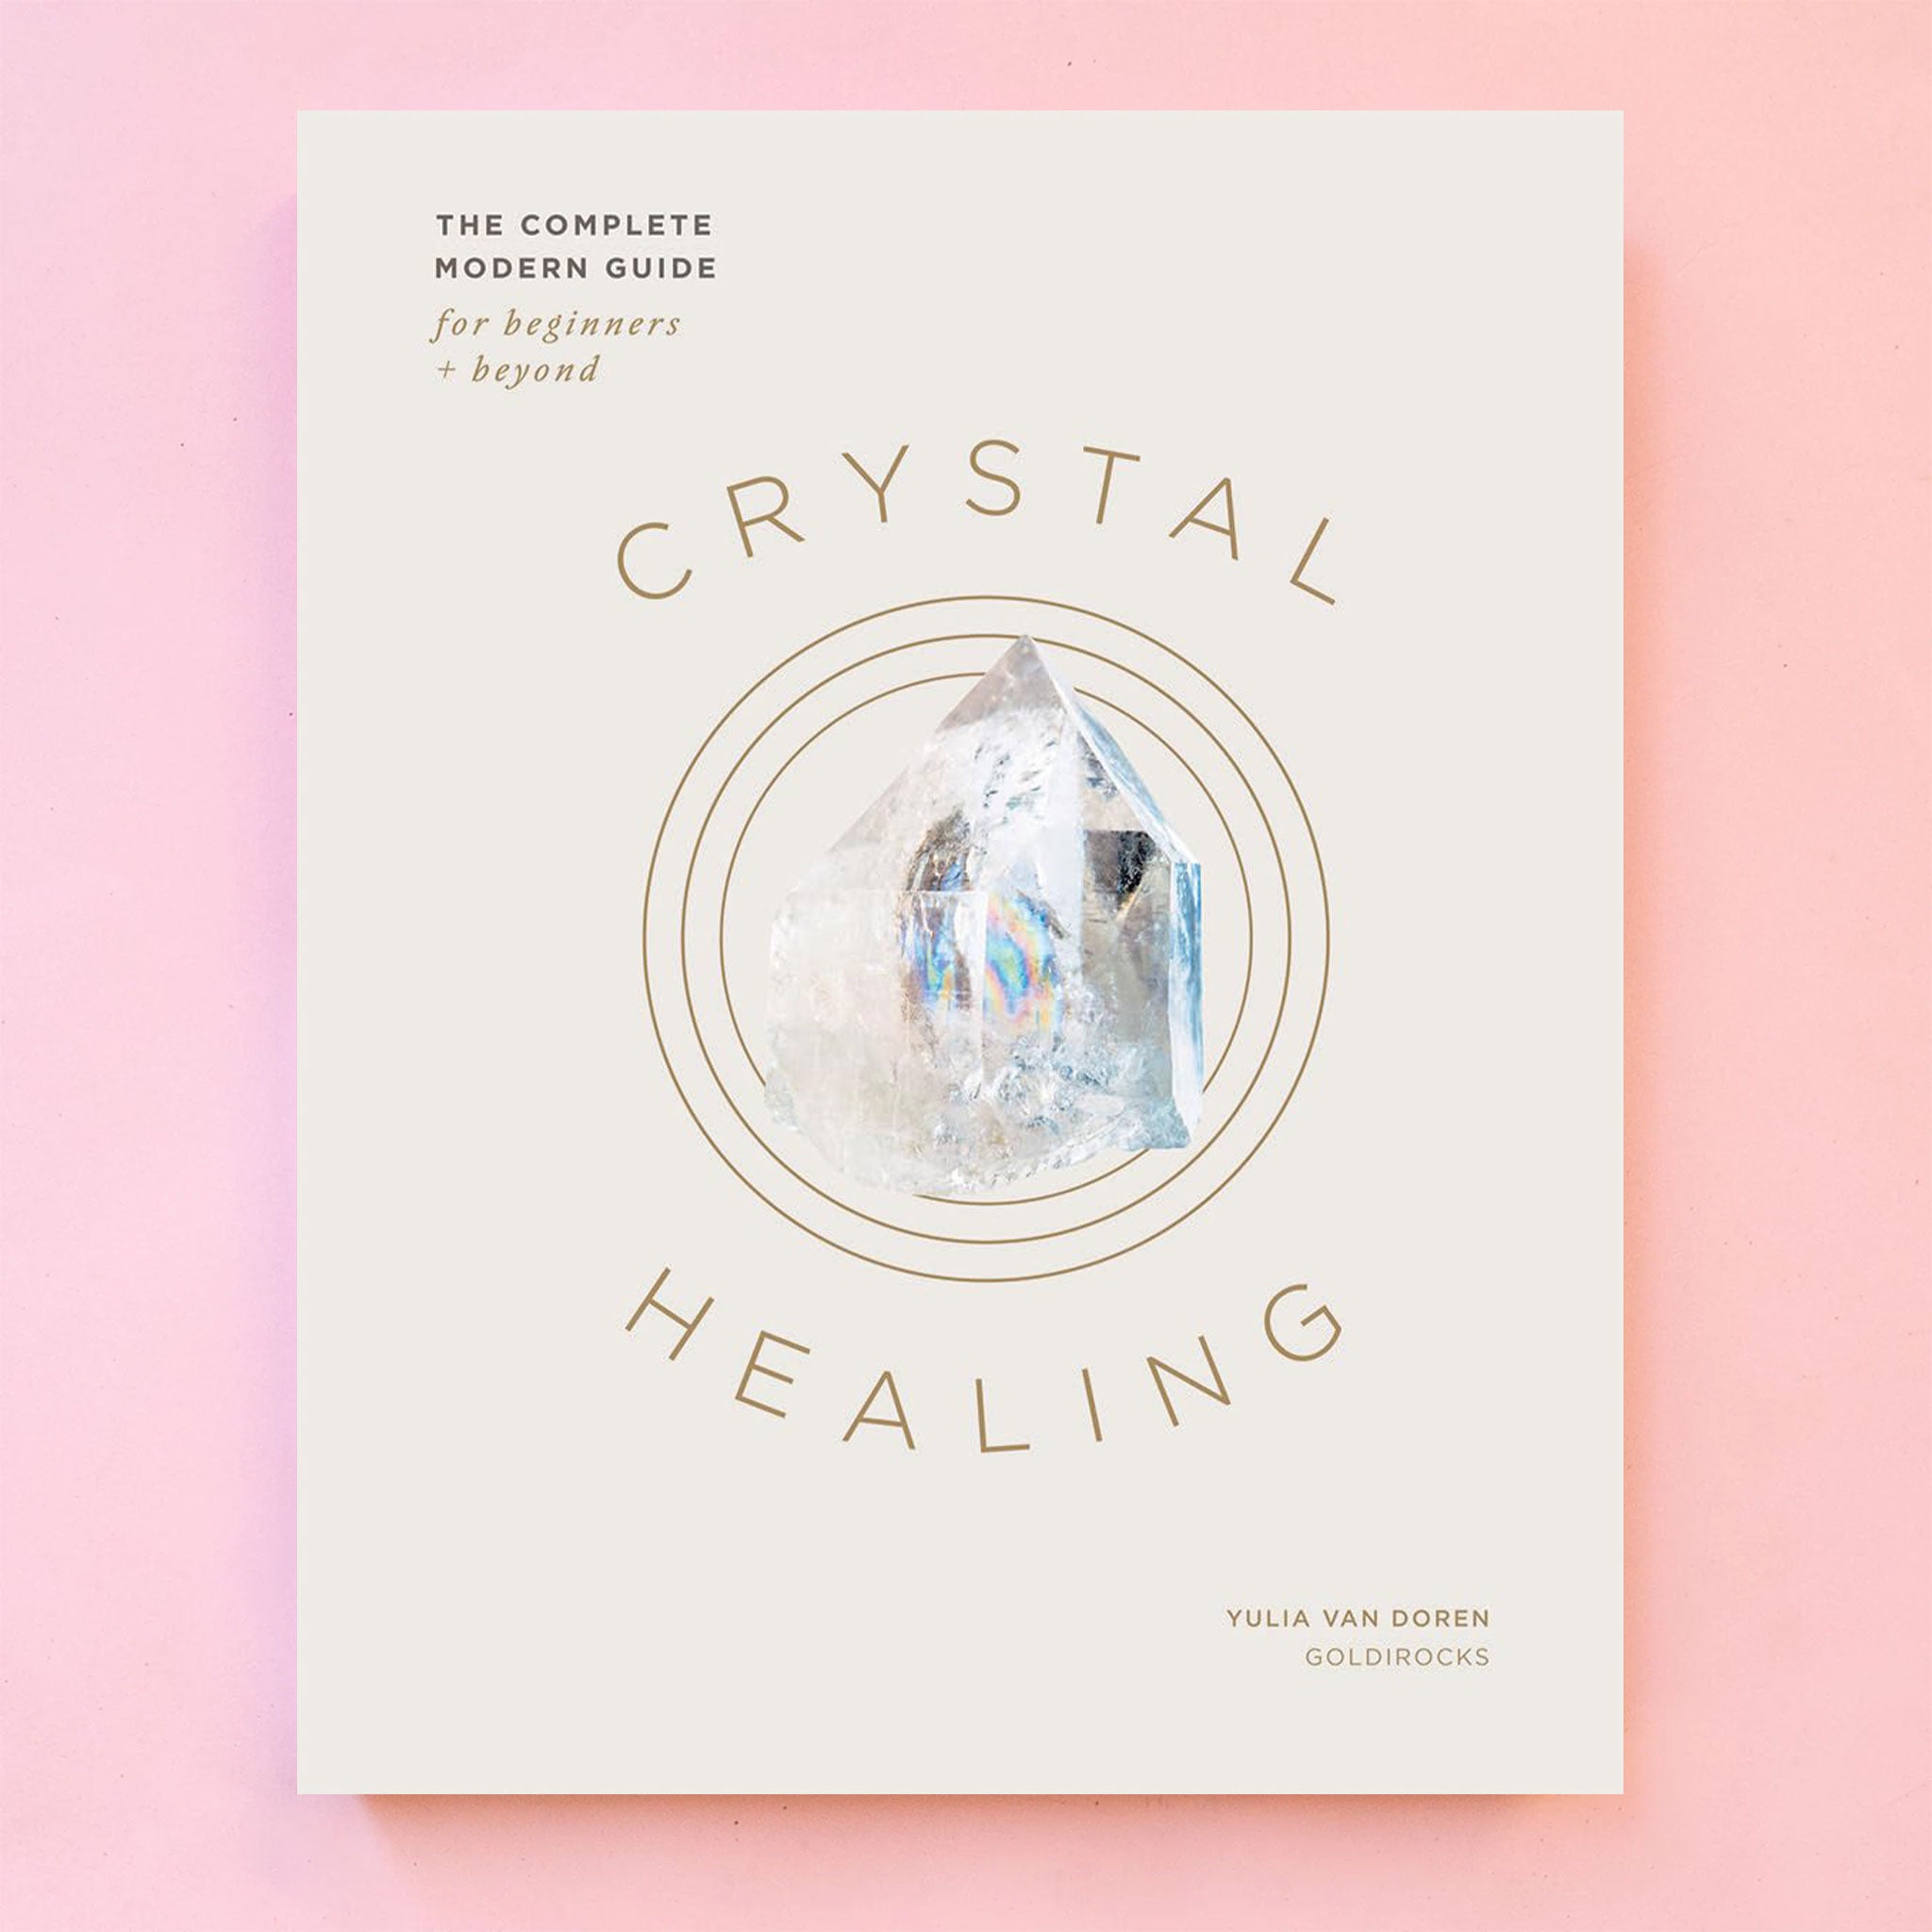 Healing Crystals Guide: Everything You Need to Know About Crystals